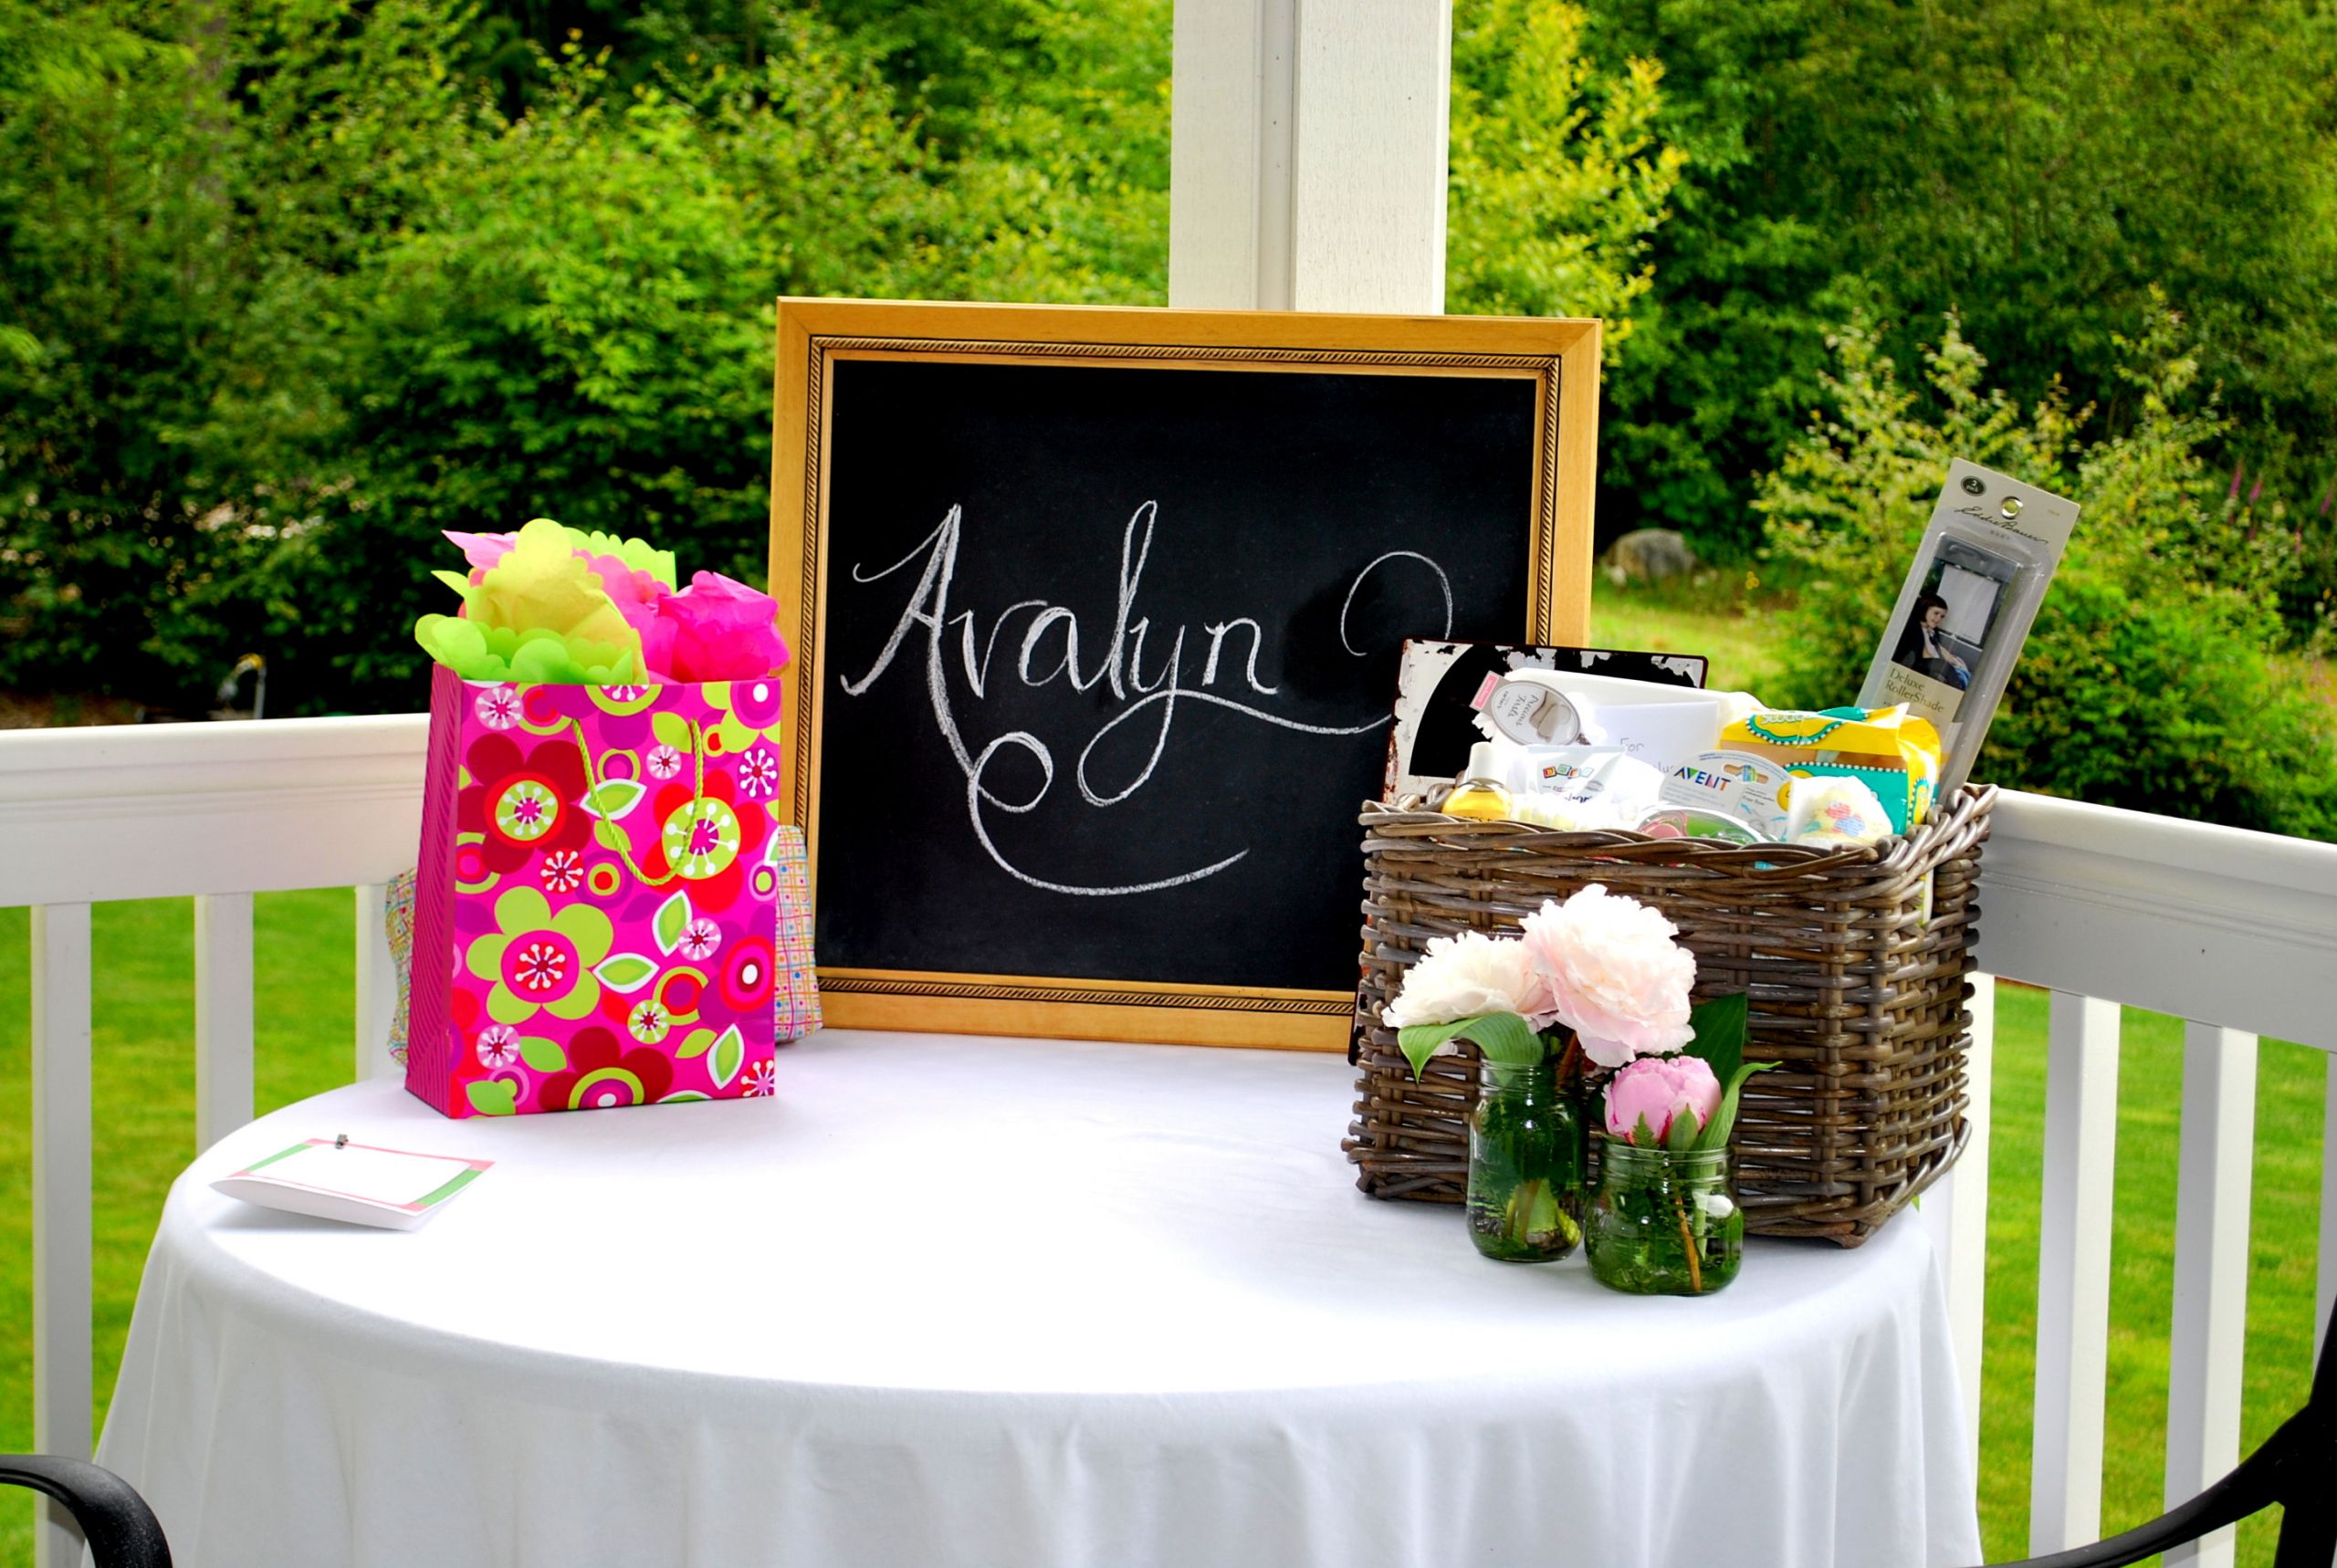 Outdoor Baby Shower Decorating Ideas
 Outdoor Baby Shower Ideas